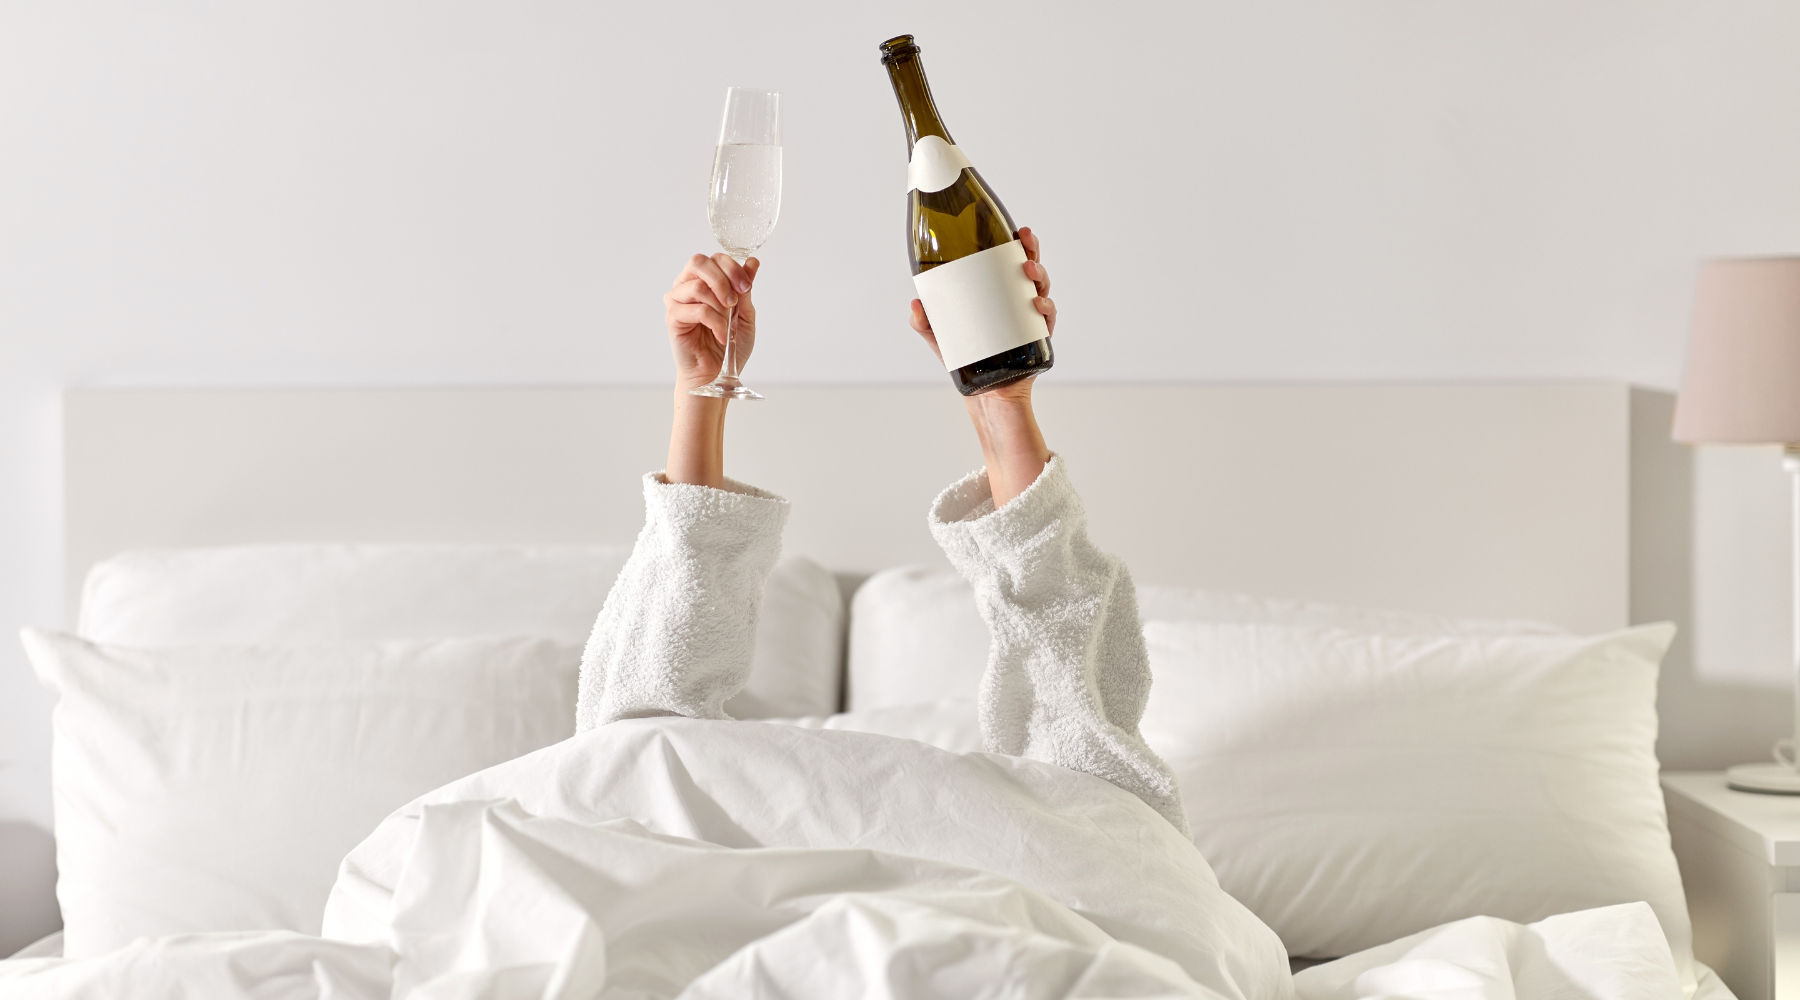 Alcohol and Sleep: The Effects of Drinking Before Bed